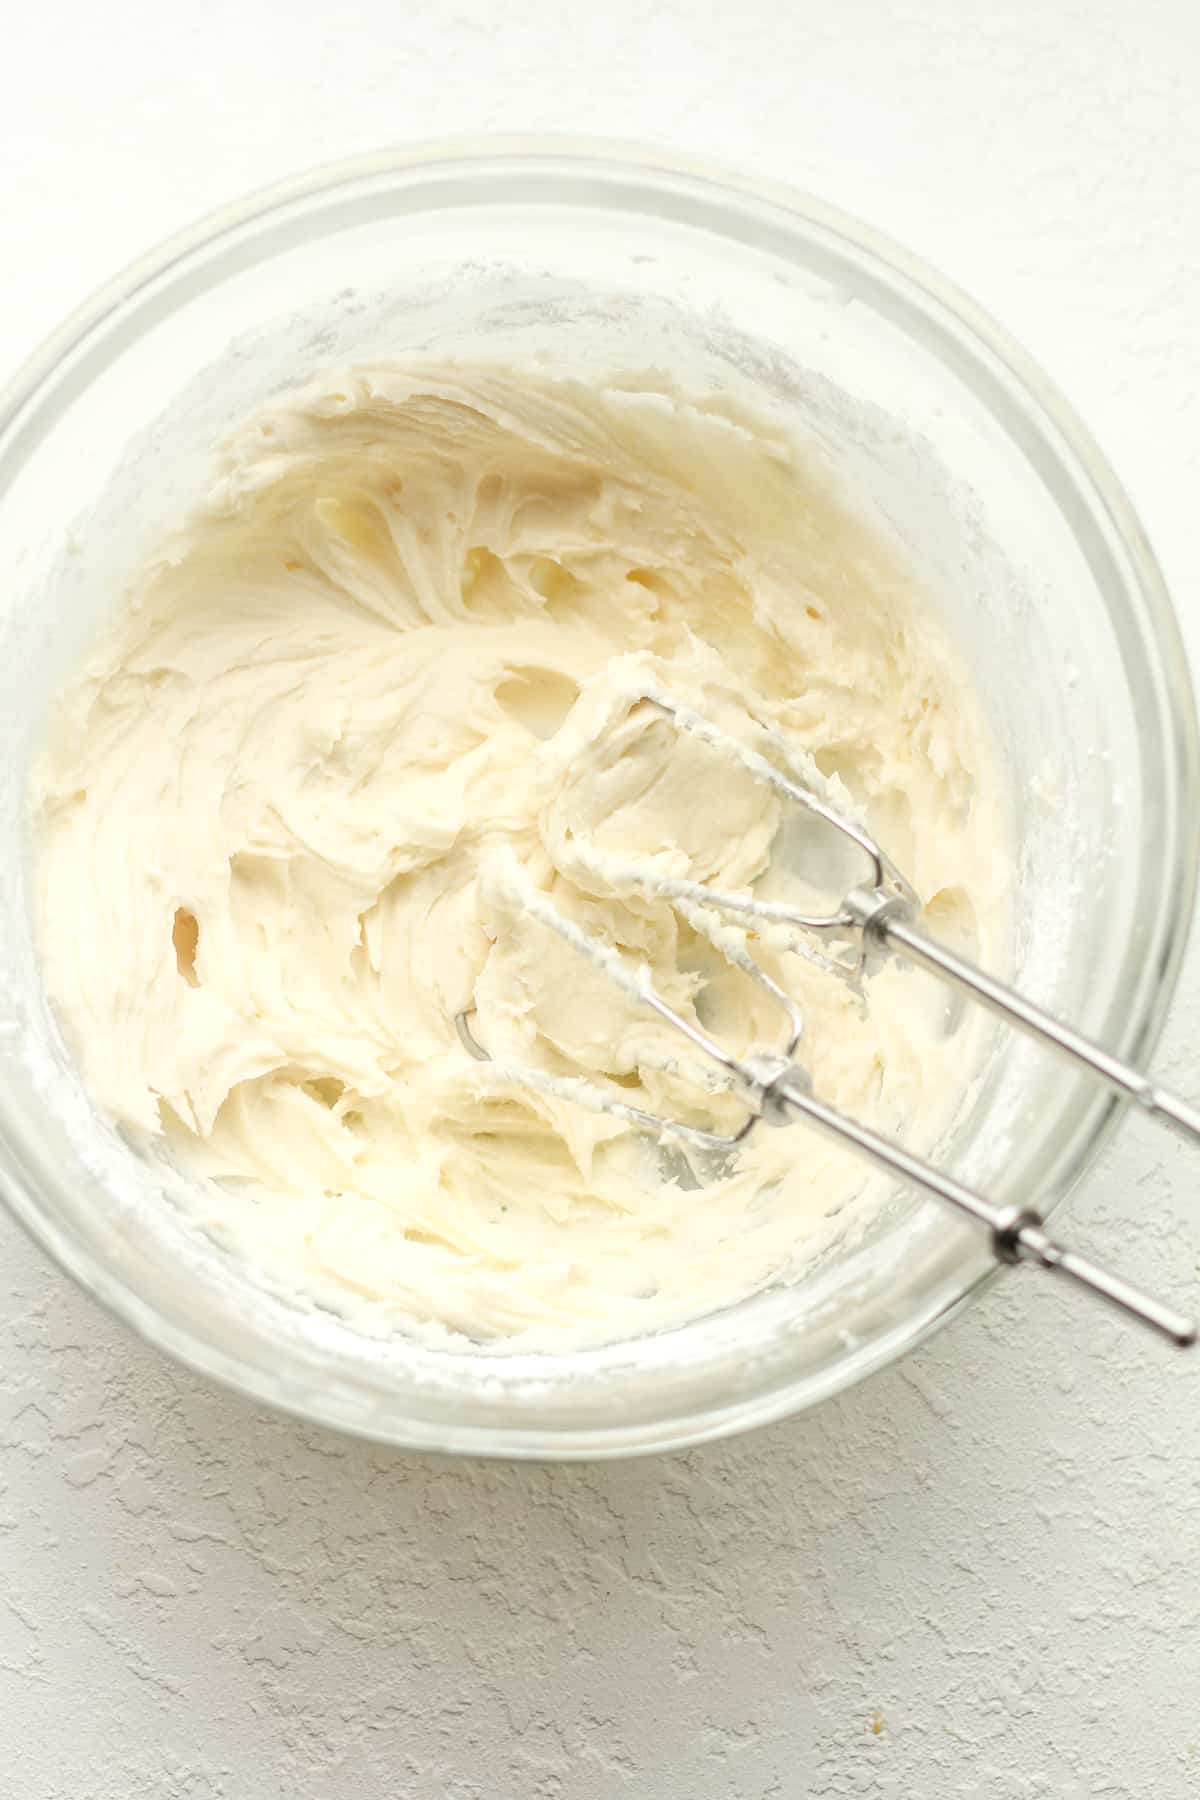 A bowl of the buttercream frosting.